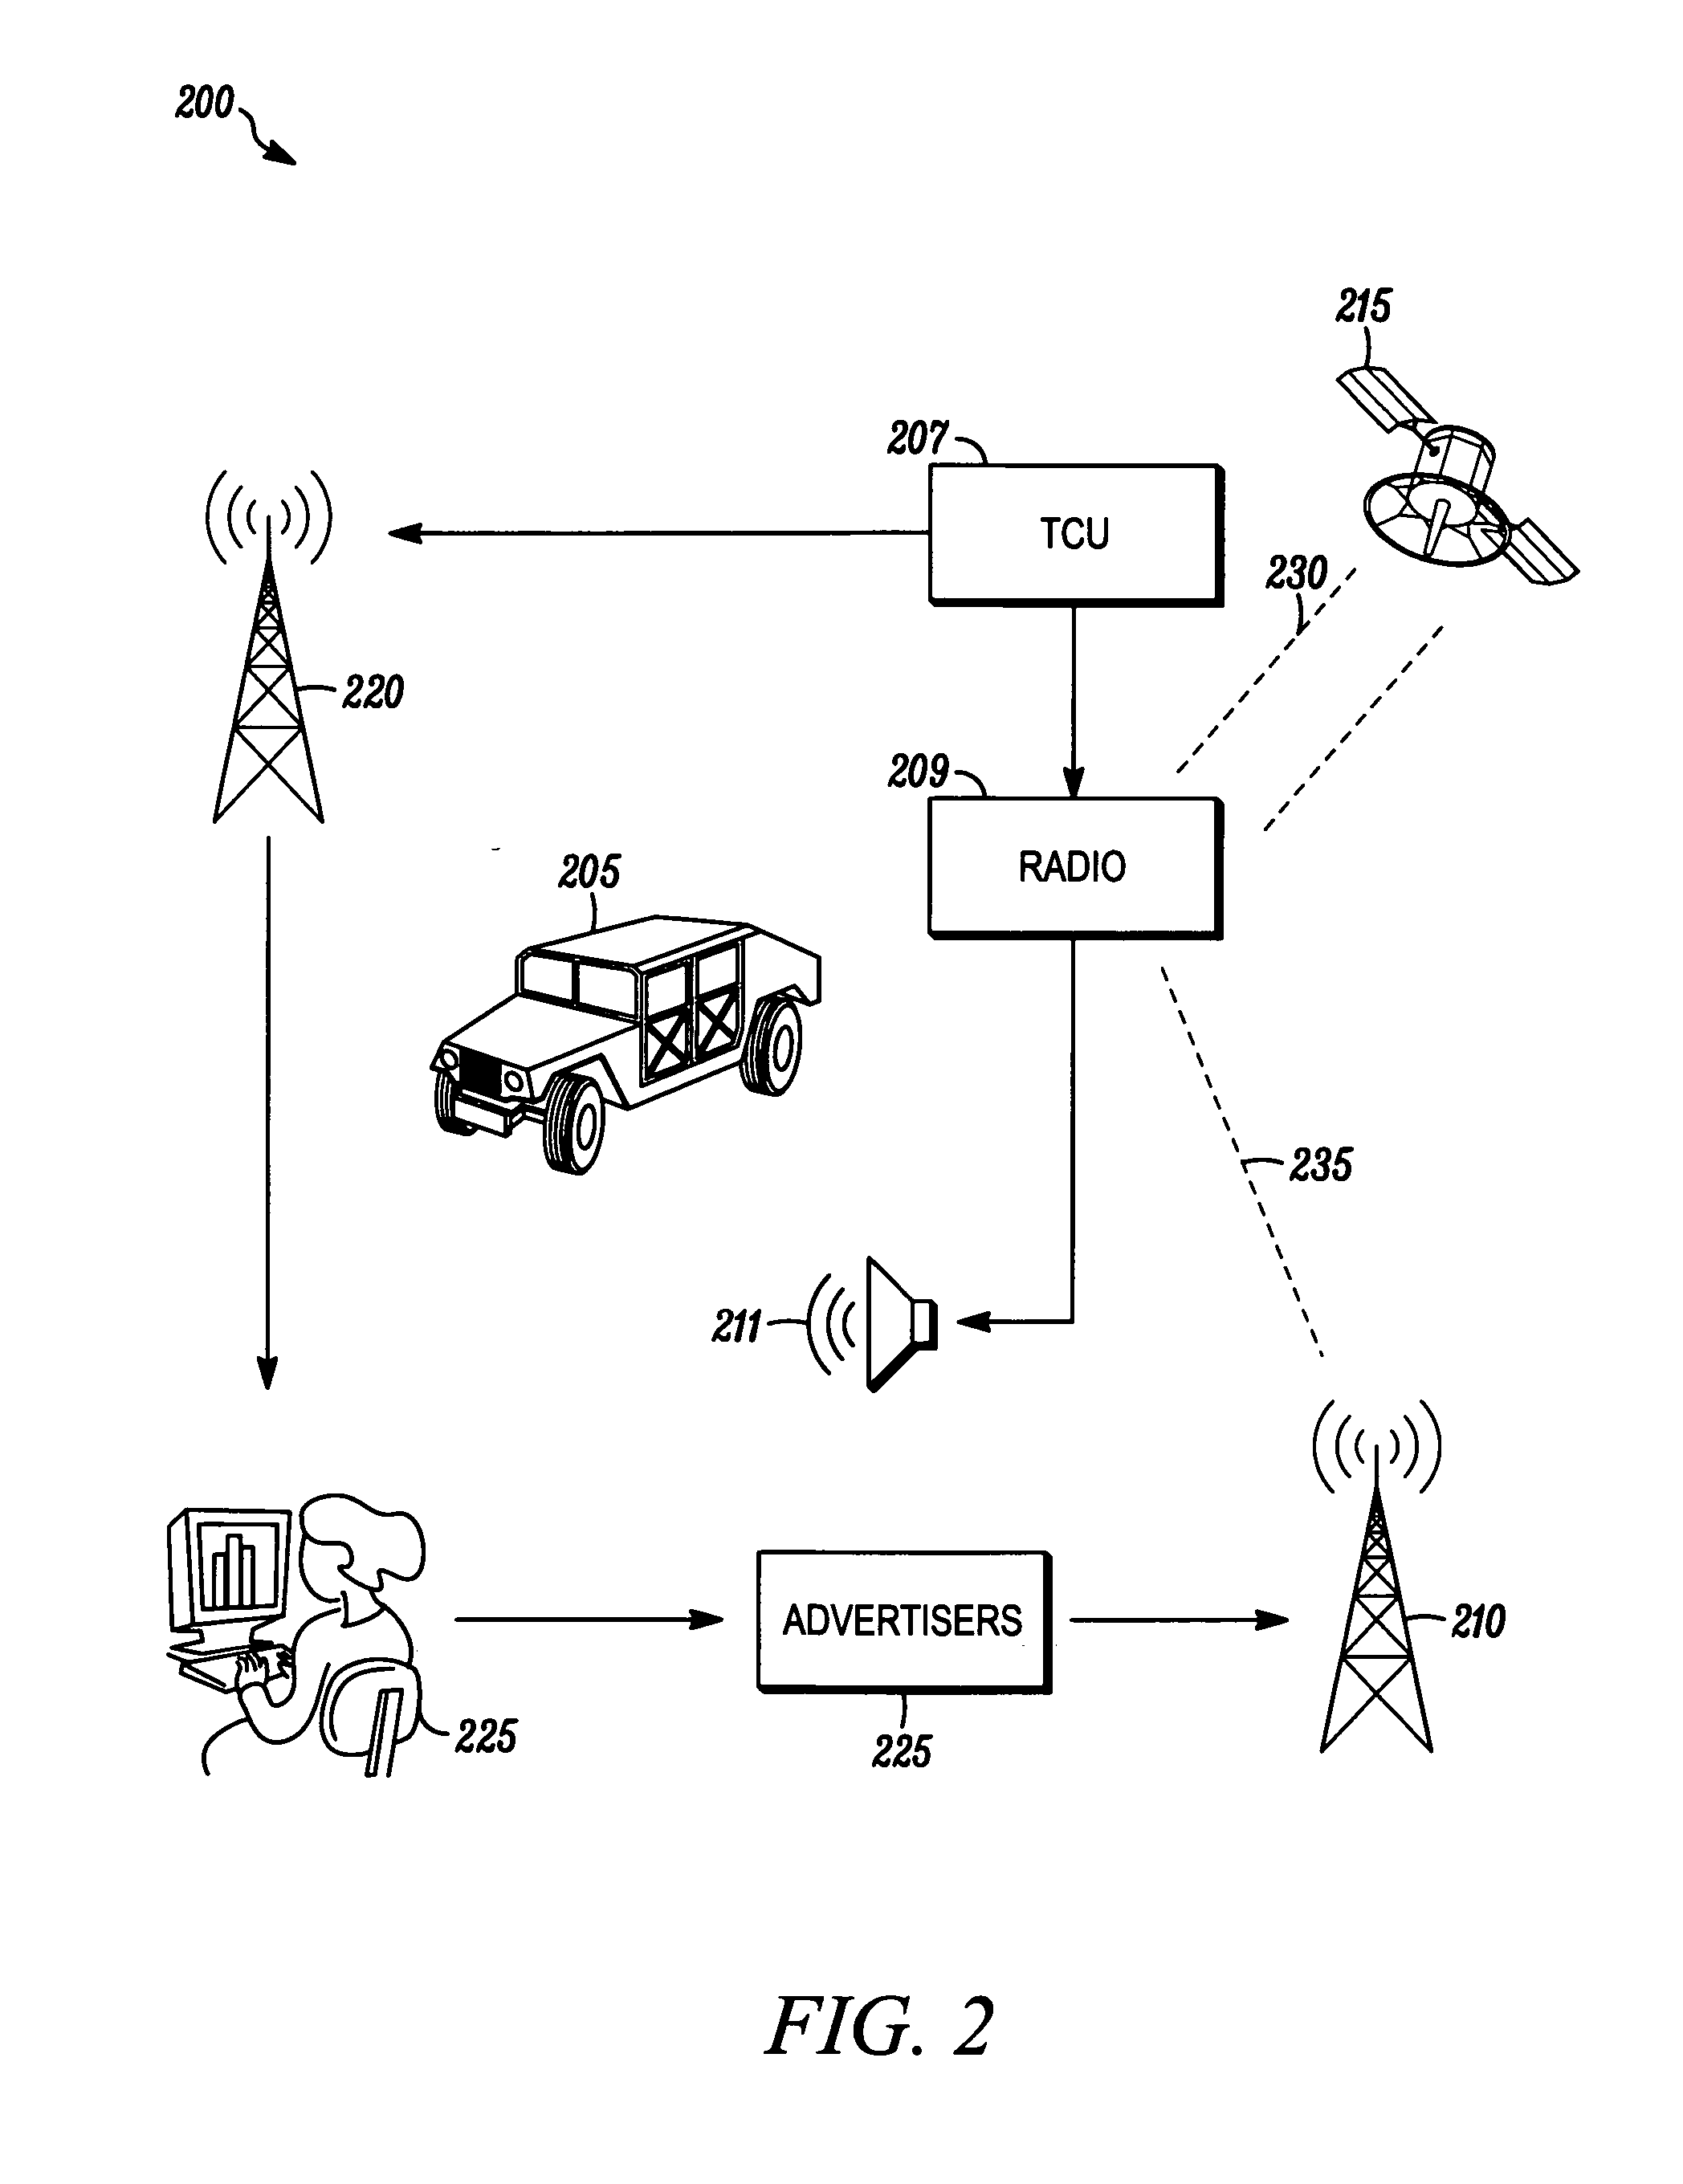 Targeted advertising system and method